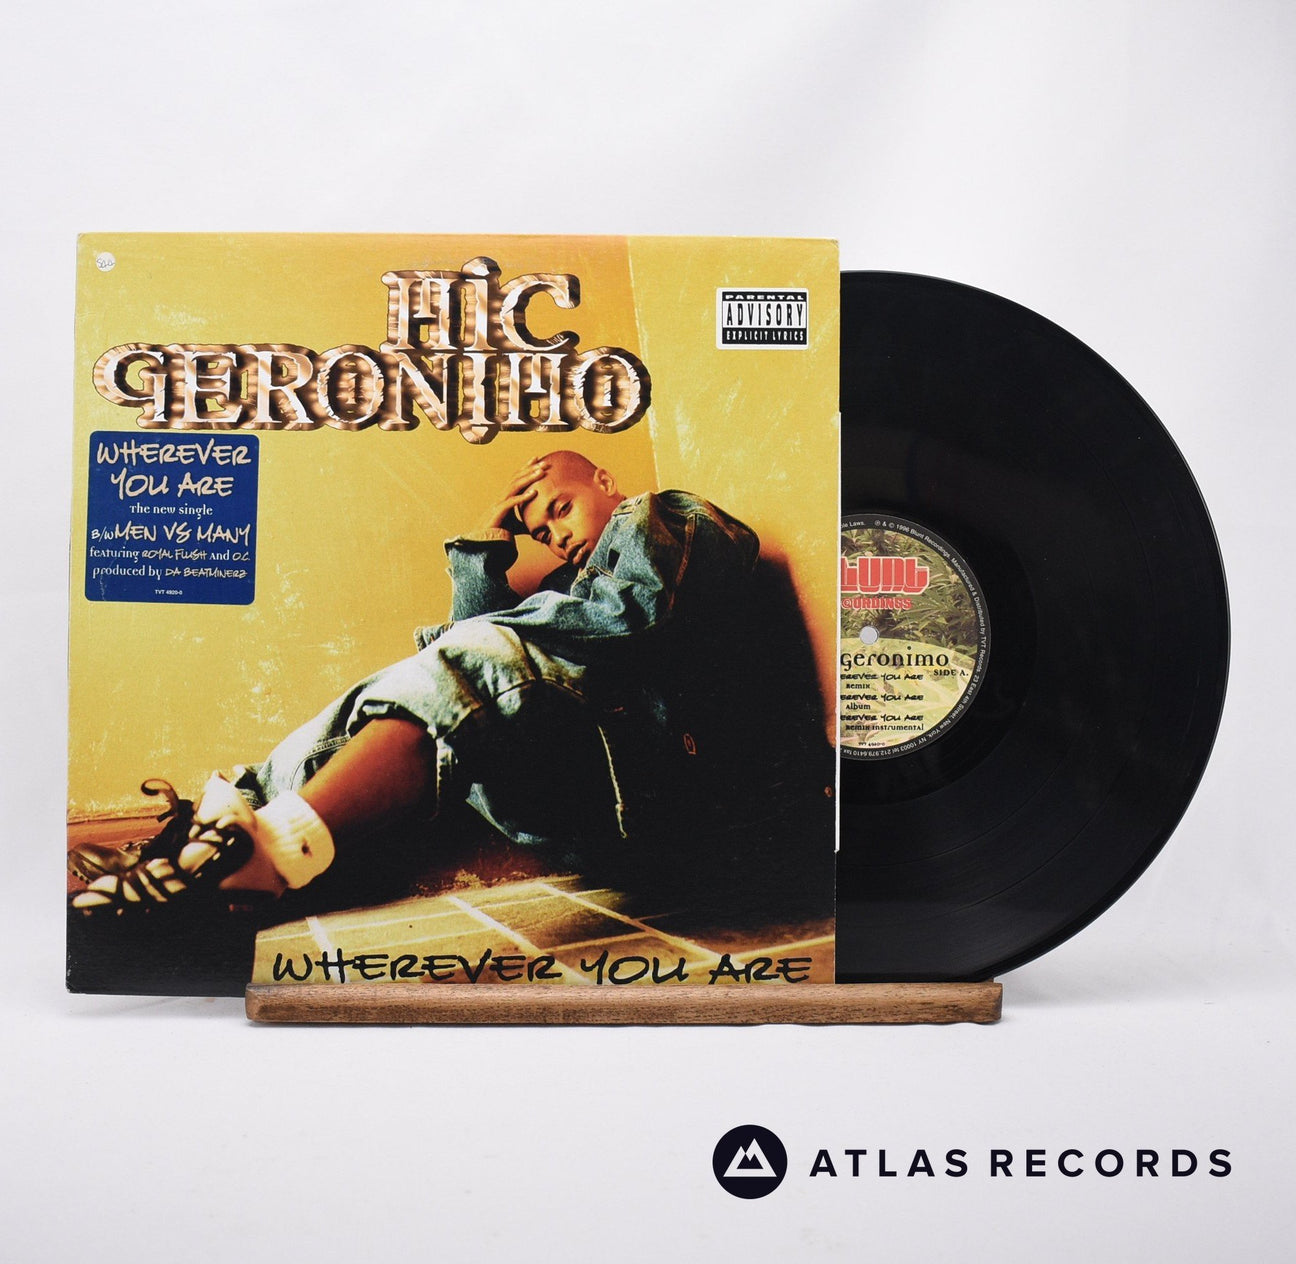 Mic Geronimo Wherever You Are 12" Vinyl Record - Front Cover & Record